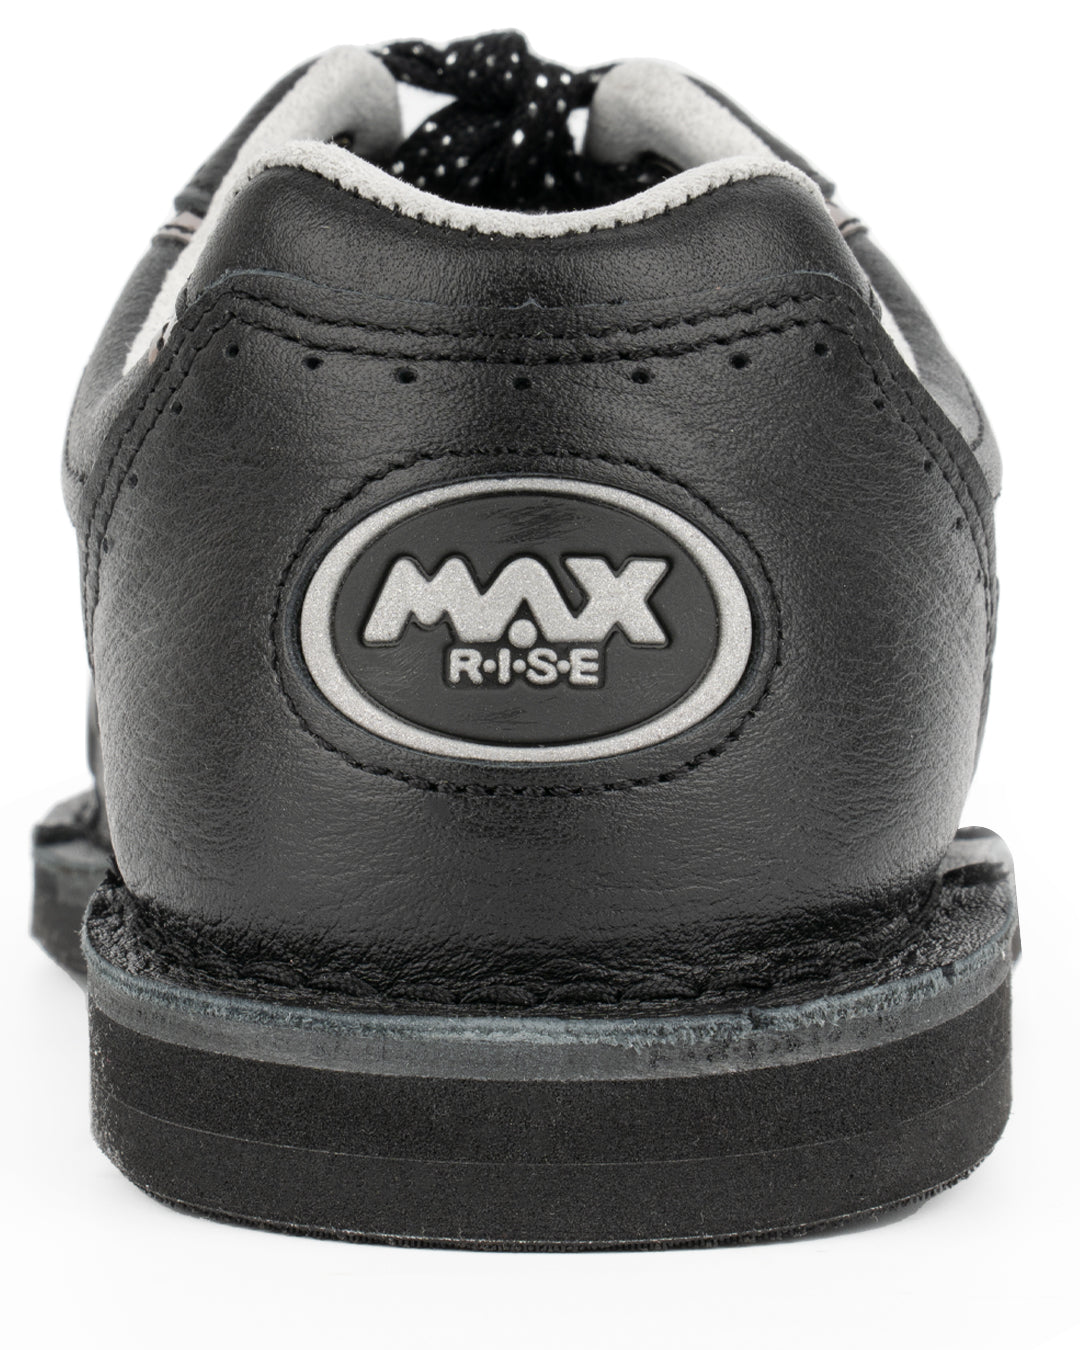 maxwelter f-5 bowling shoes black leather back